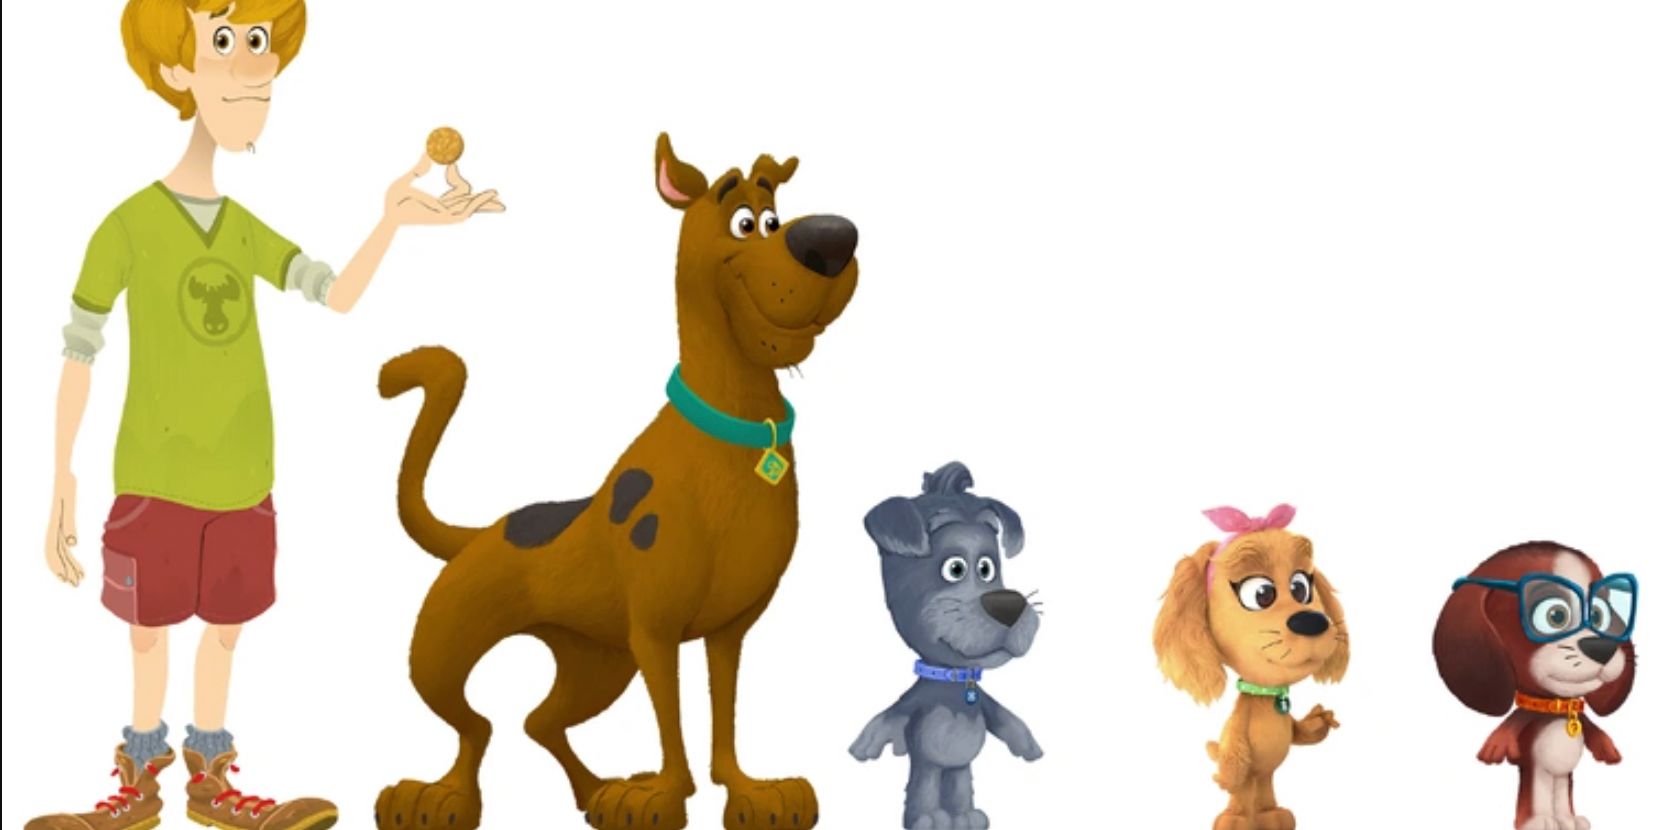 Scooby Doo and the Mystery Pups character art includes Shaggy, Scooby, and three puppies